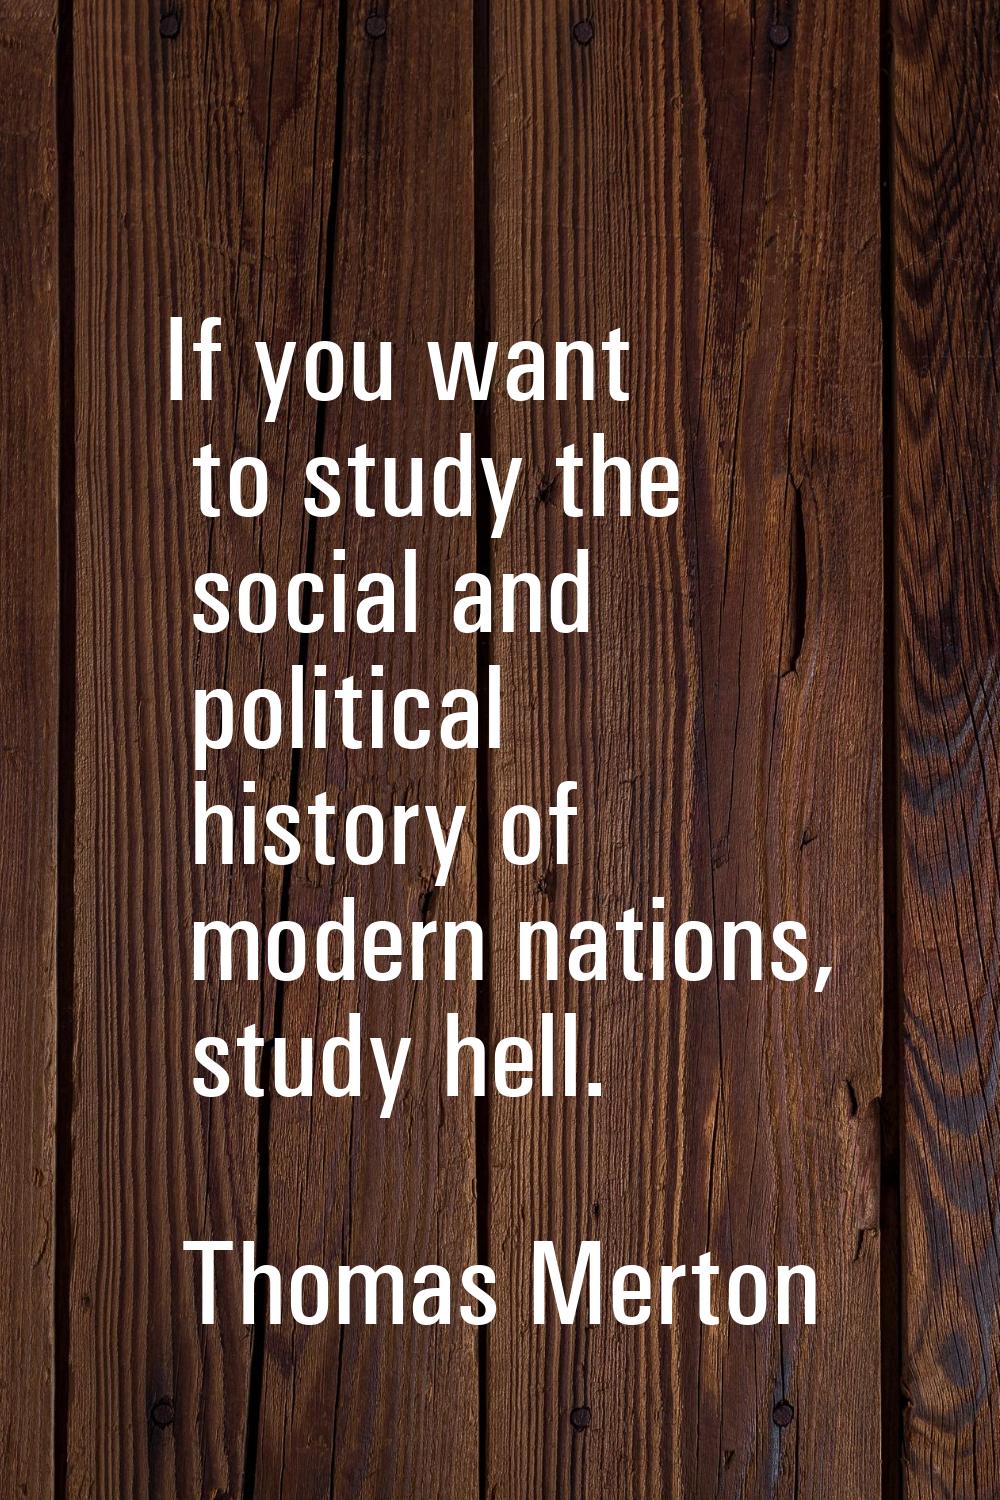 If you want to study the social and political history of modern nations, study hell.